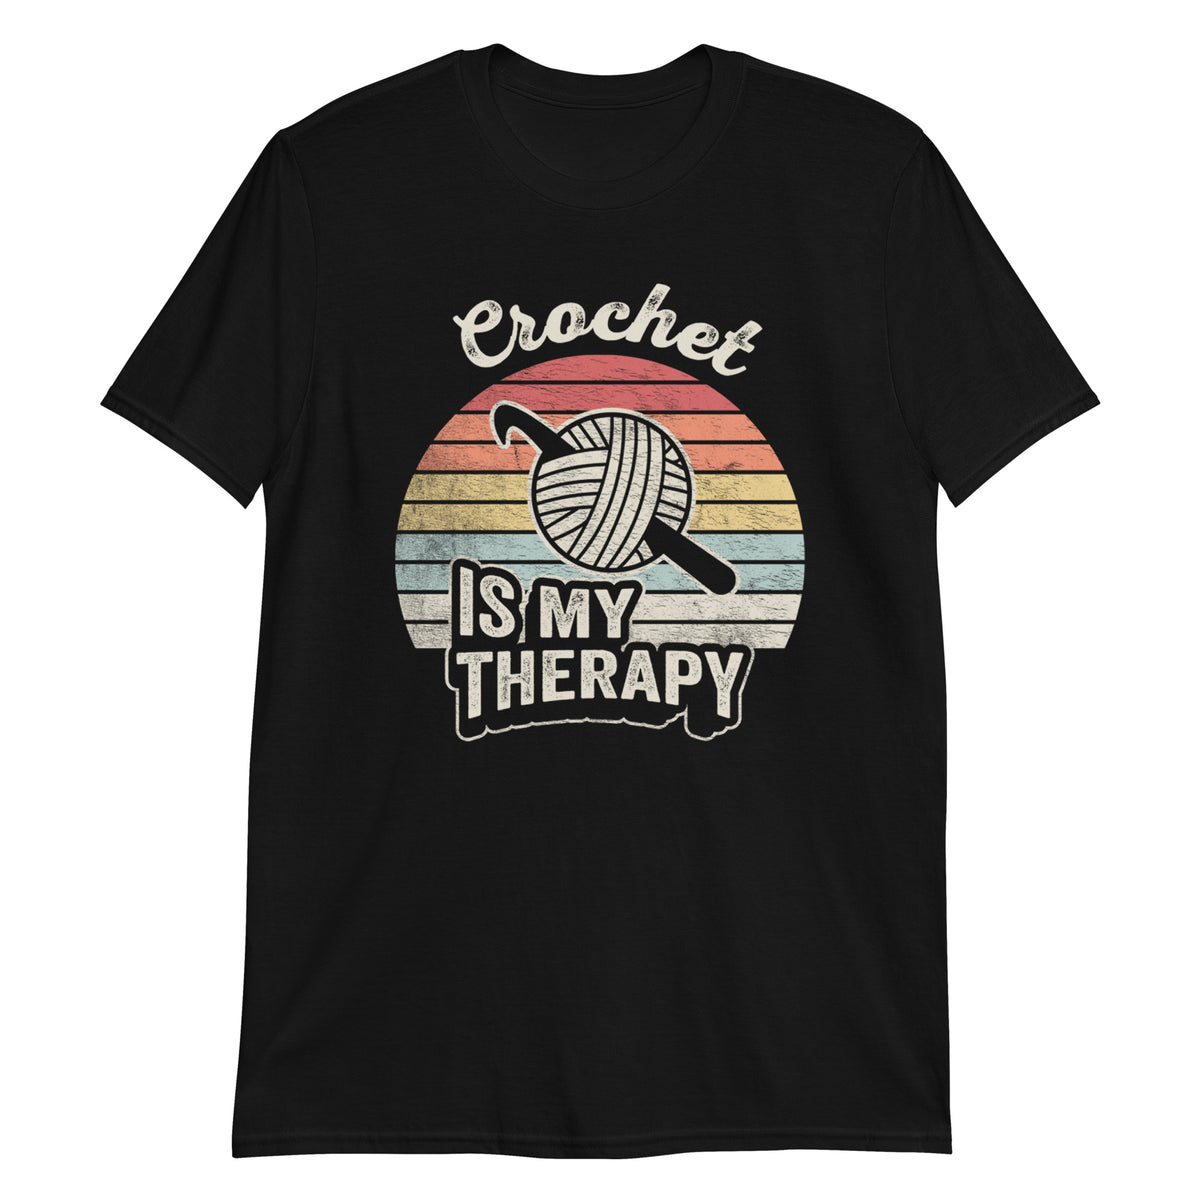 Crochet is My Therapy T-Shirt